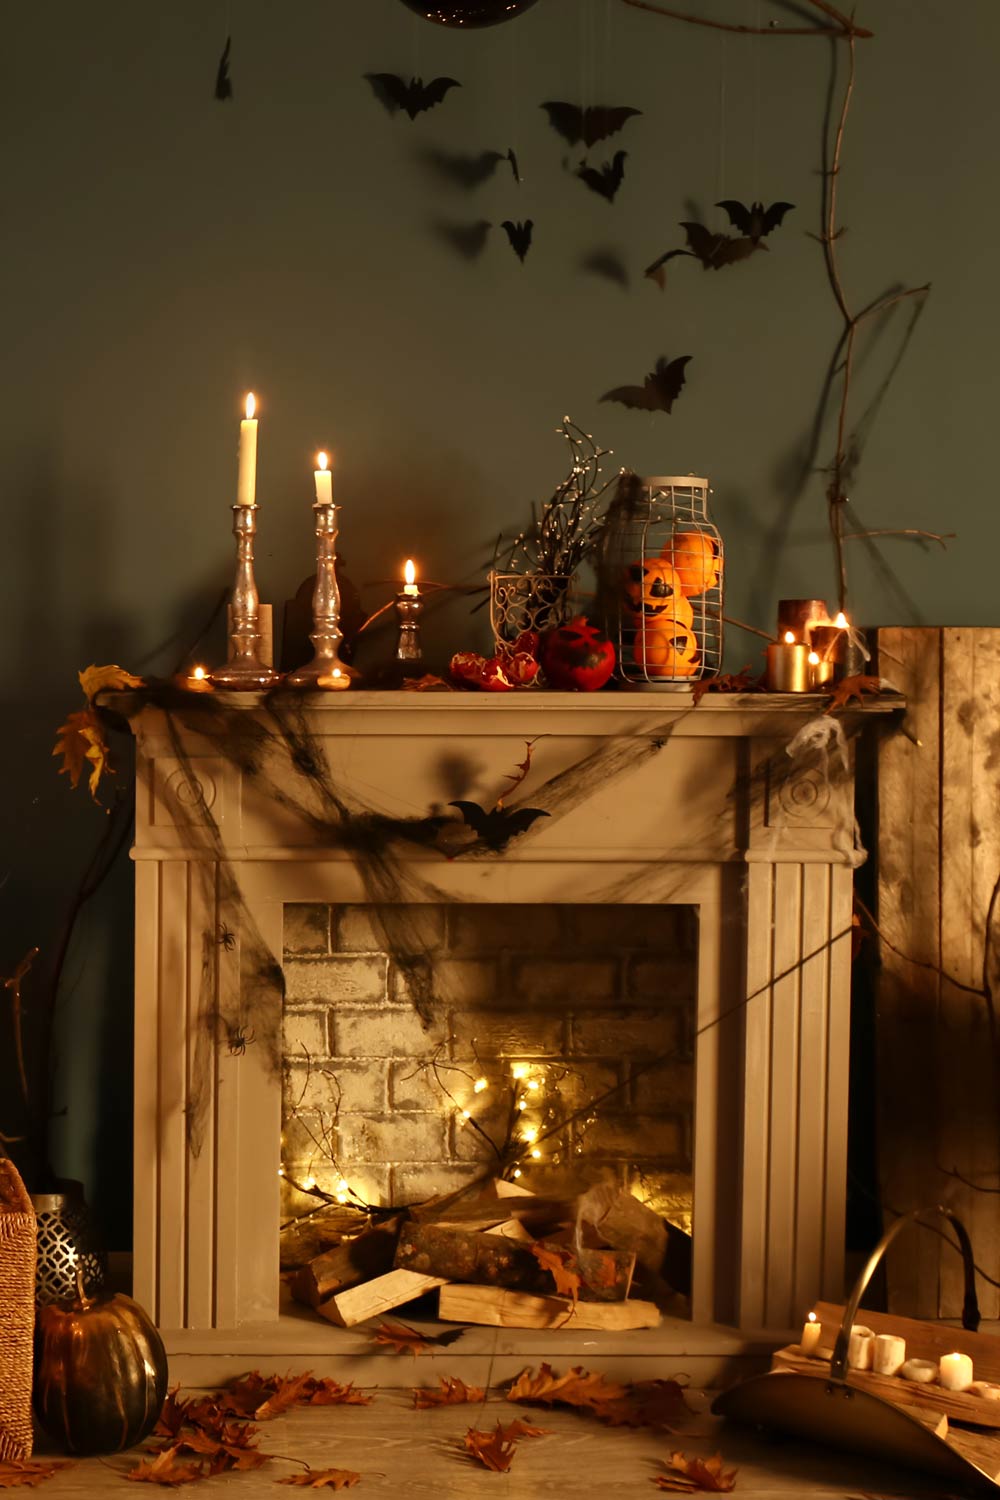 How to Decorate Your Fireplace for Halloween?